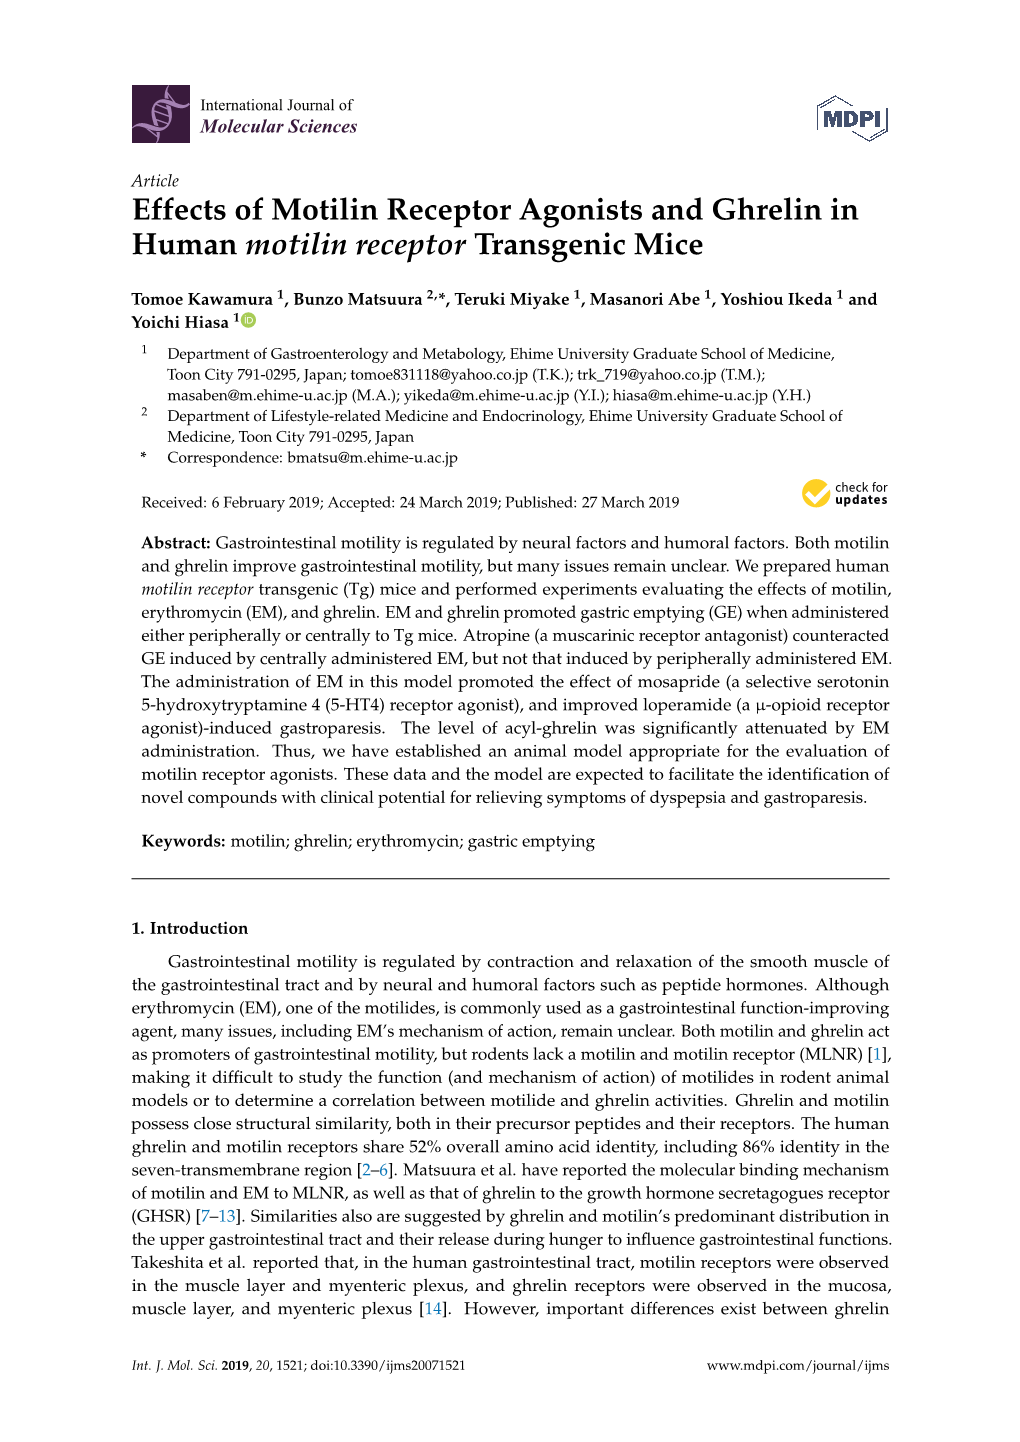 Effects of Motilin Receptor Agonists and Ghrelin in Human Motilin Receptor Transgenic Mice